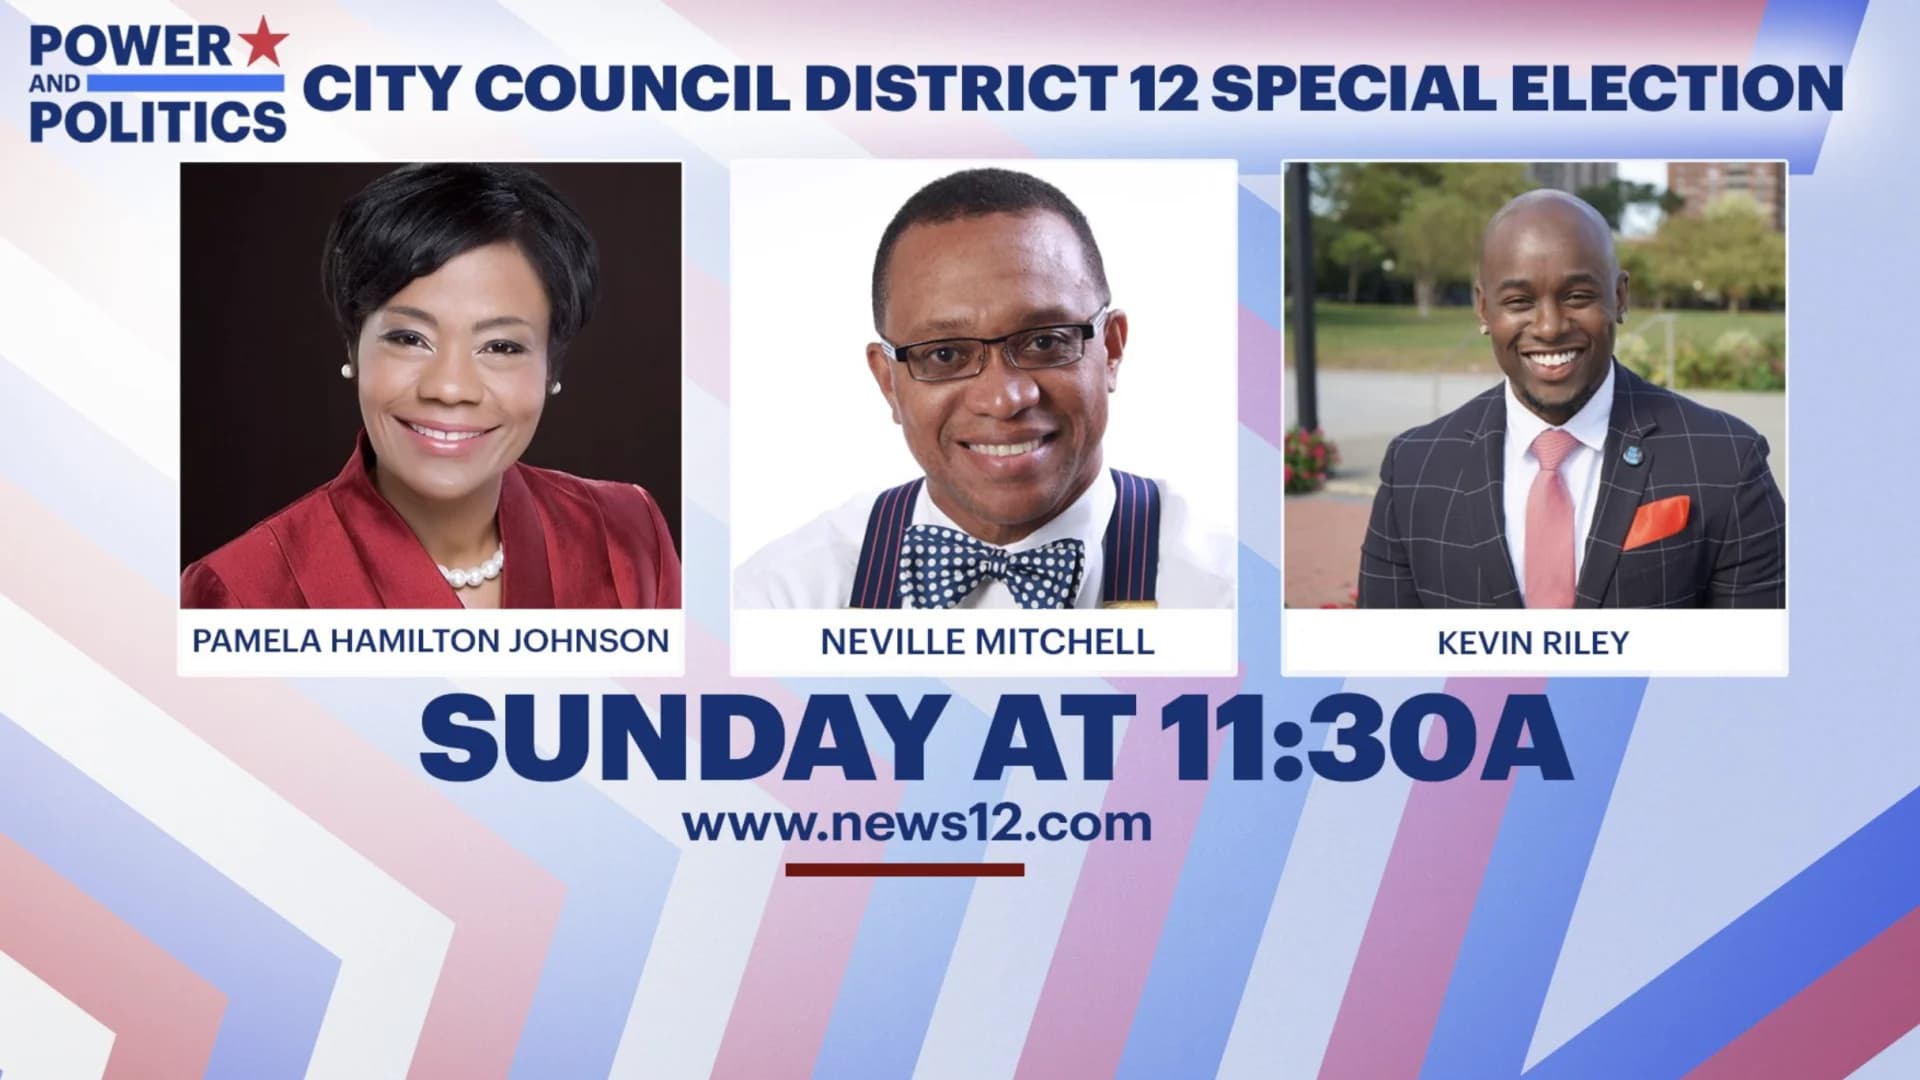 Meet the Candidates in the City Council District 12 Special Election